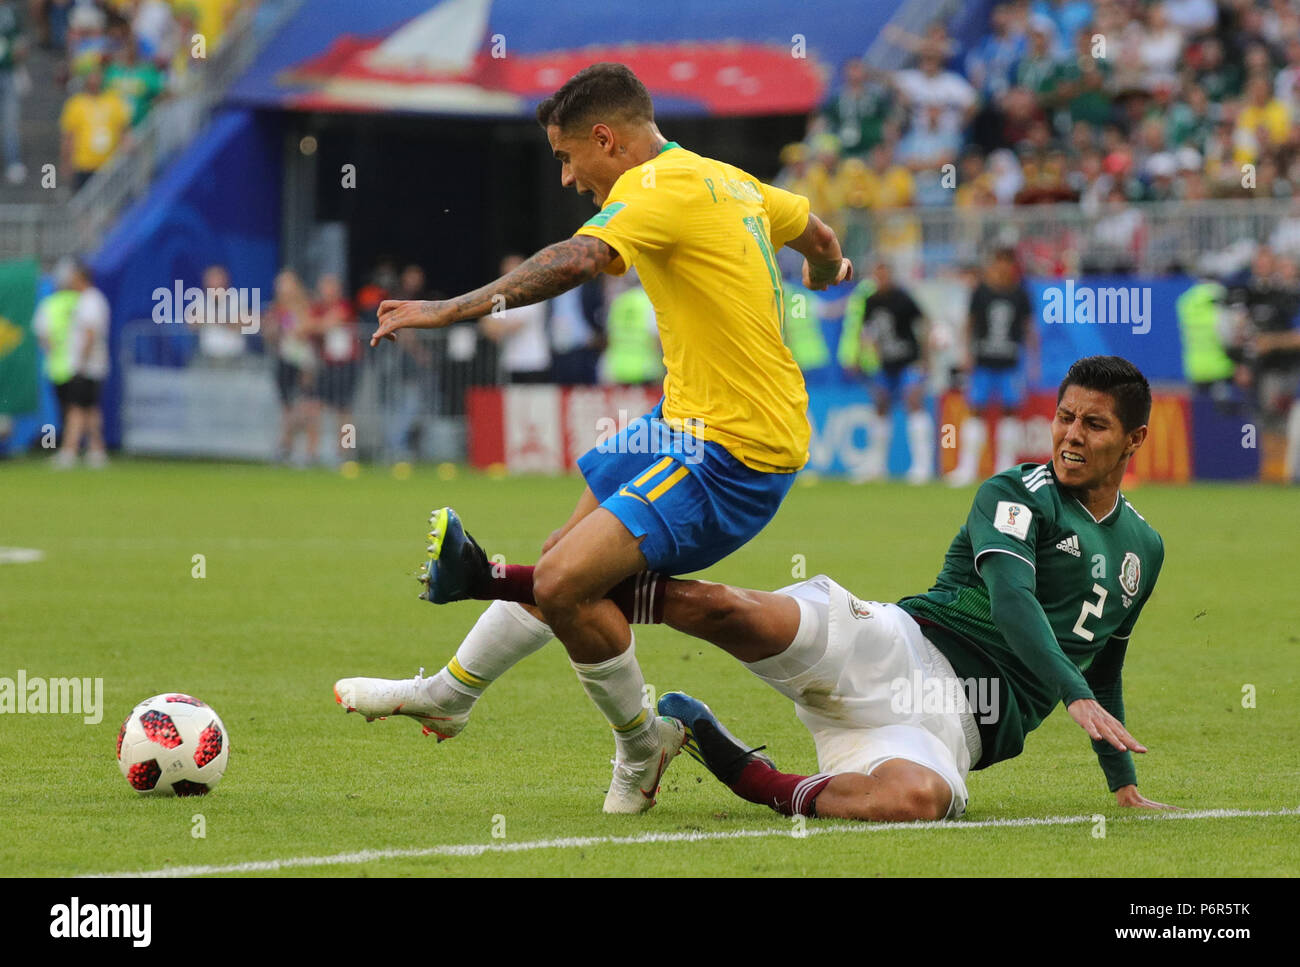 Samara, Russia. 02nd July, 2018. Soccer, World Cup 2018, Final round - round of 16: Mexico vs. Brazil at the Samara stadium: Brazil's Philippe Coutinho and Mexico's Hugo Ayala Castro (R) vying for the ball. Credit: Christian Charisius/dpa/Alamy Live News Stock Photo